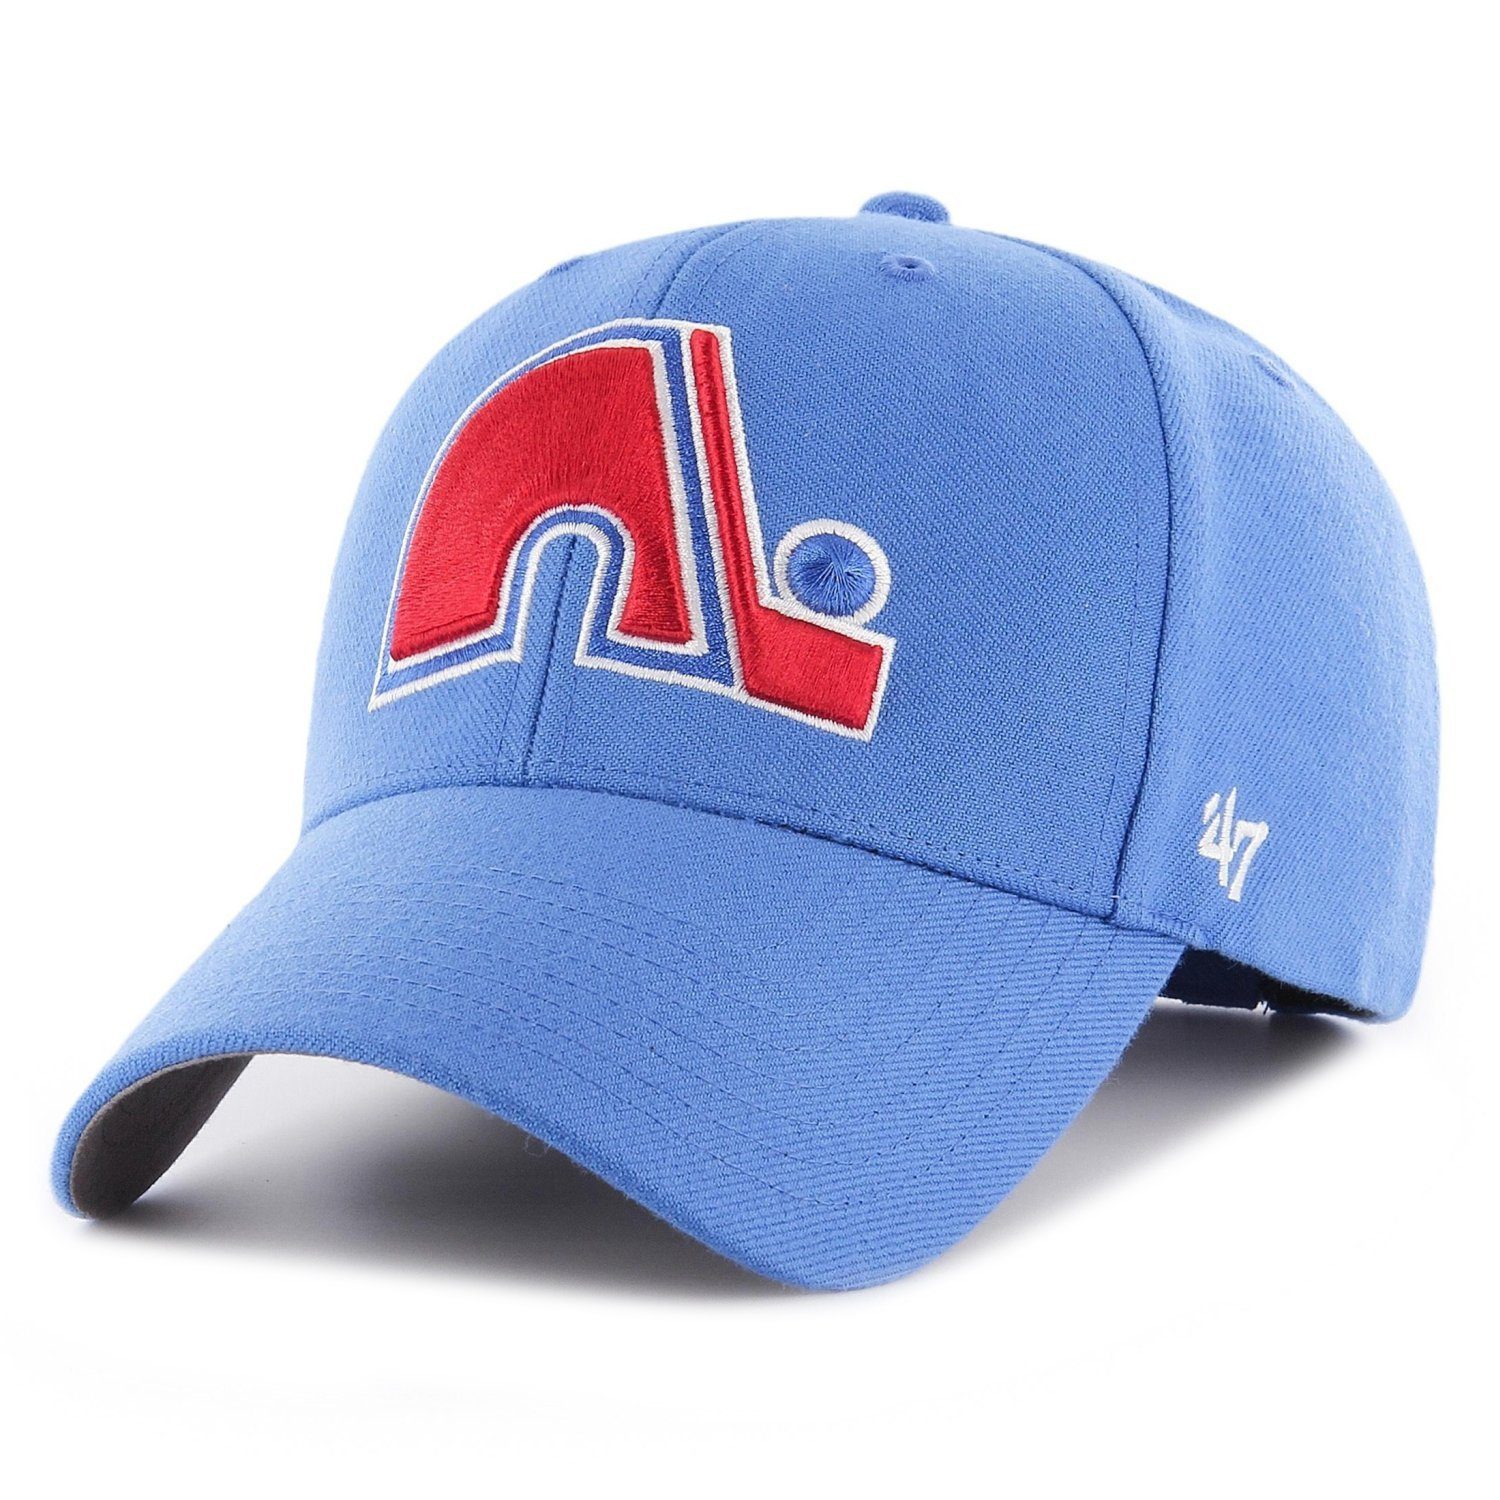 '47 Brand Trucker Cap Relaxed Fit NHL Quebec Nordiques